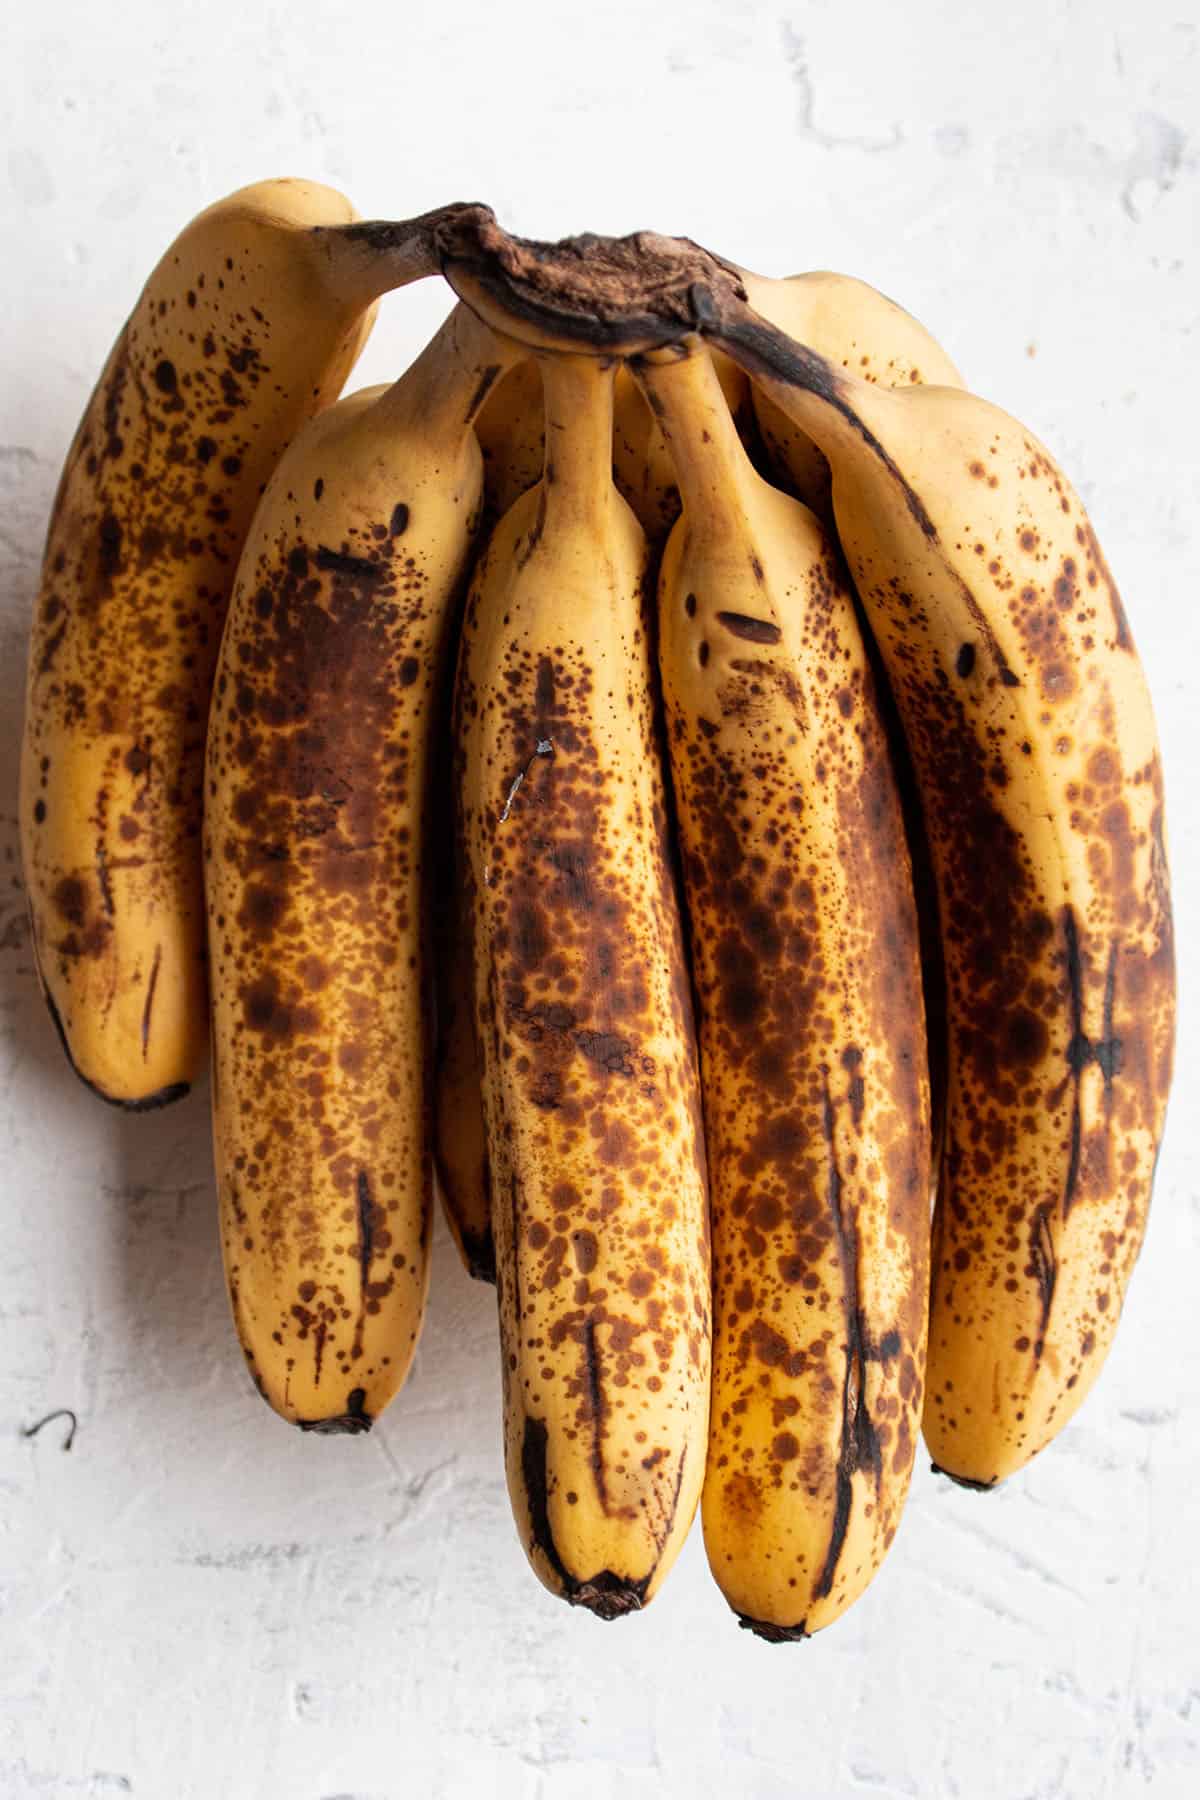 A bundle of overly ripe banana with brown speckles.